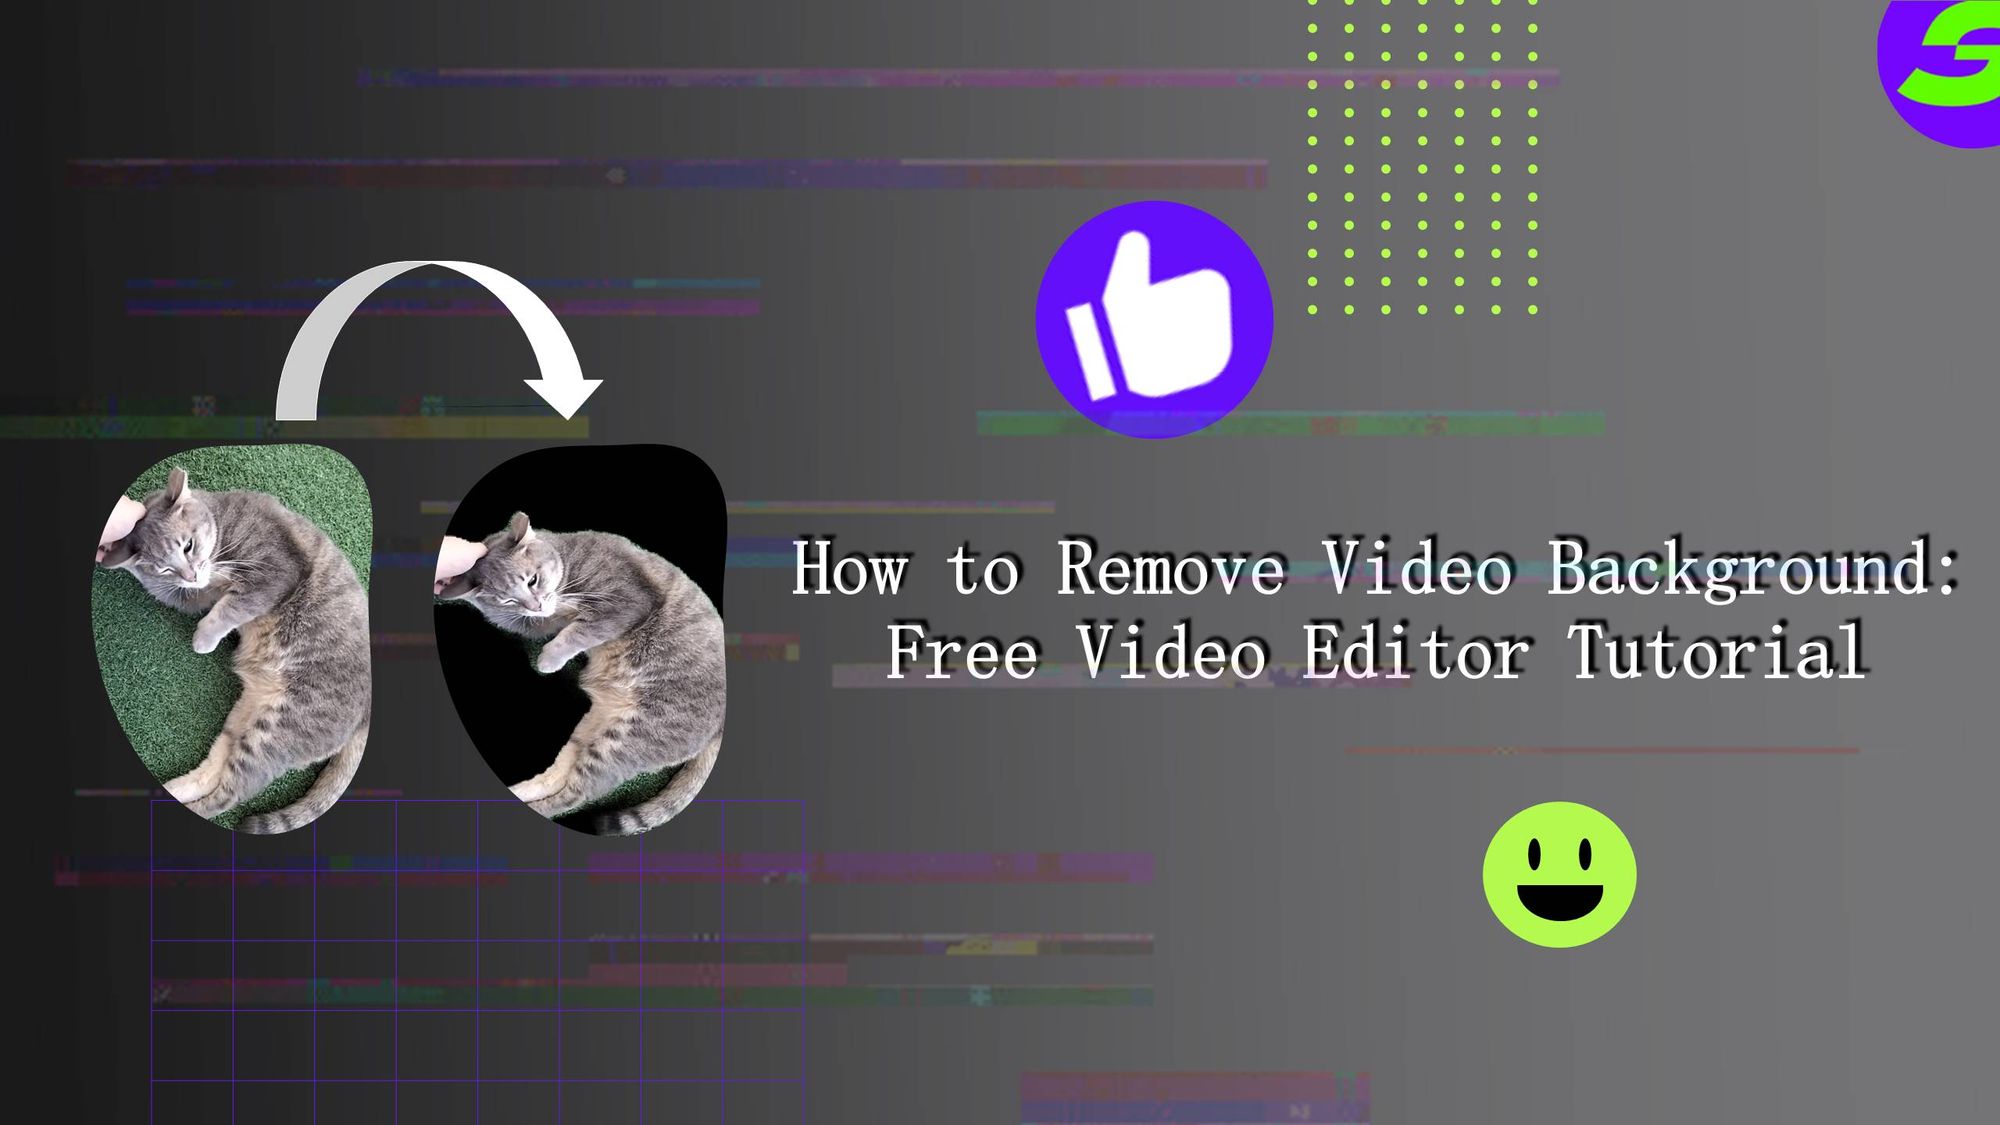 Step-by-Step Guide: How to Remove Video Background with ShotCut